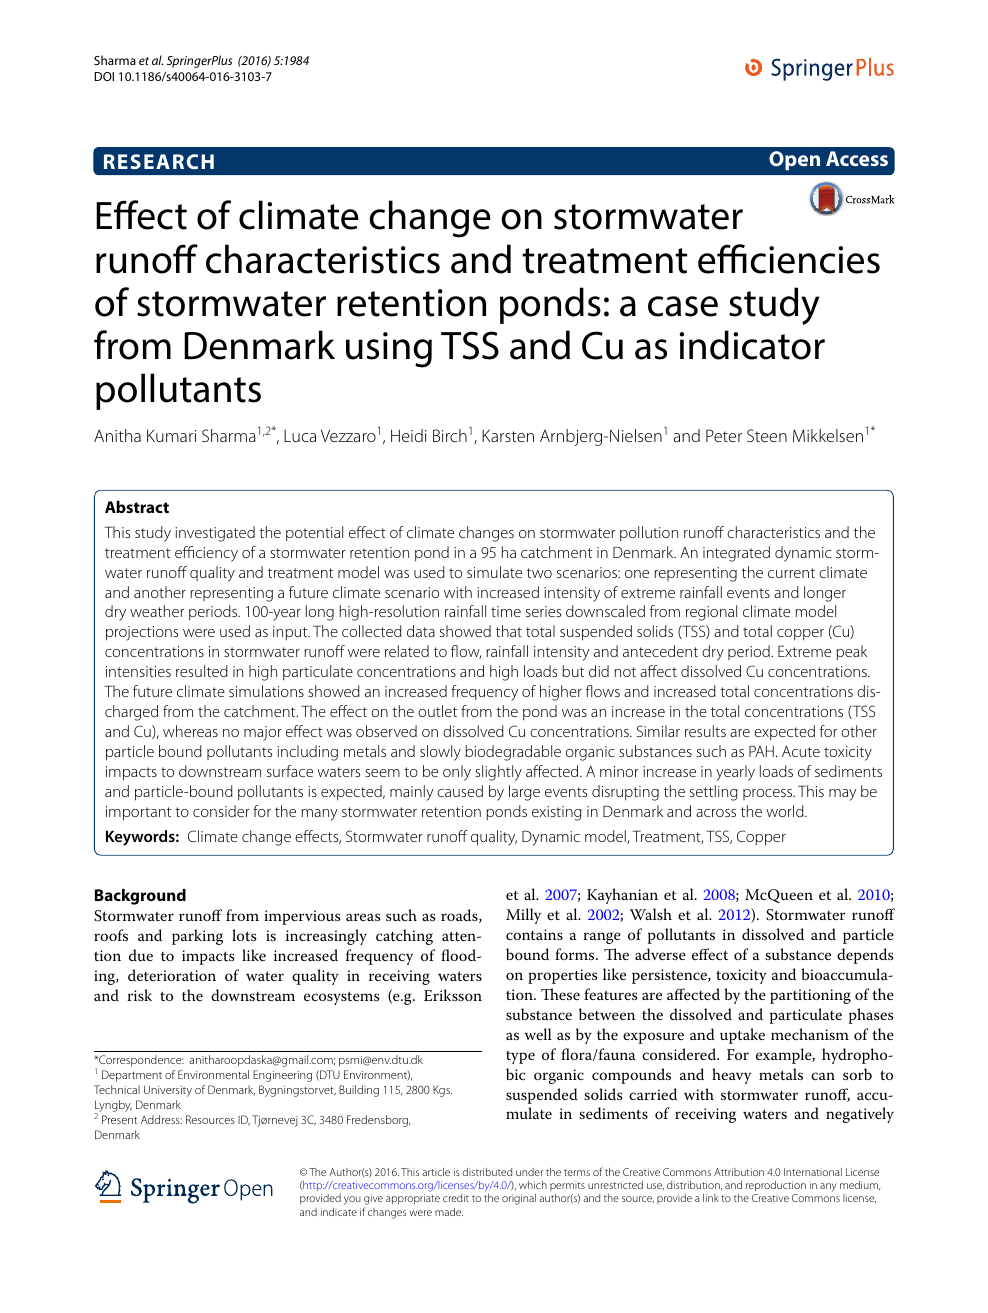 Effect of climate change on stormwater runoff characteristics and treatment efficiencies of stormwater retention ponds: a study from Denmark using TSS and Cu as indicator pollutants – topic of research paper